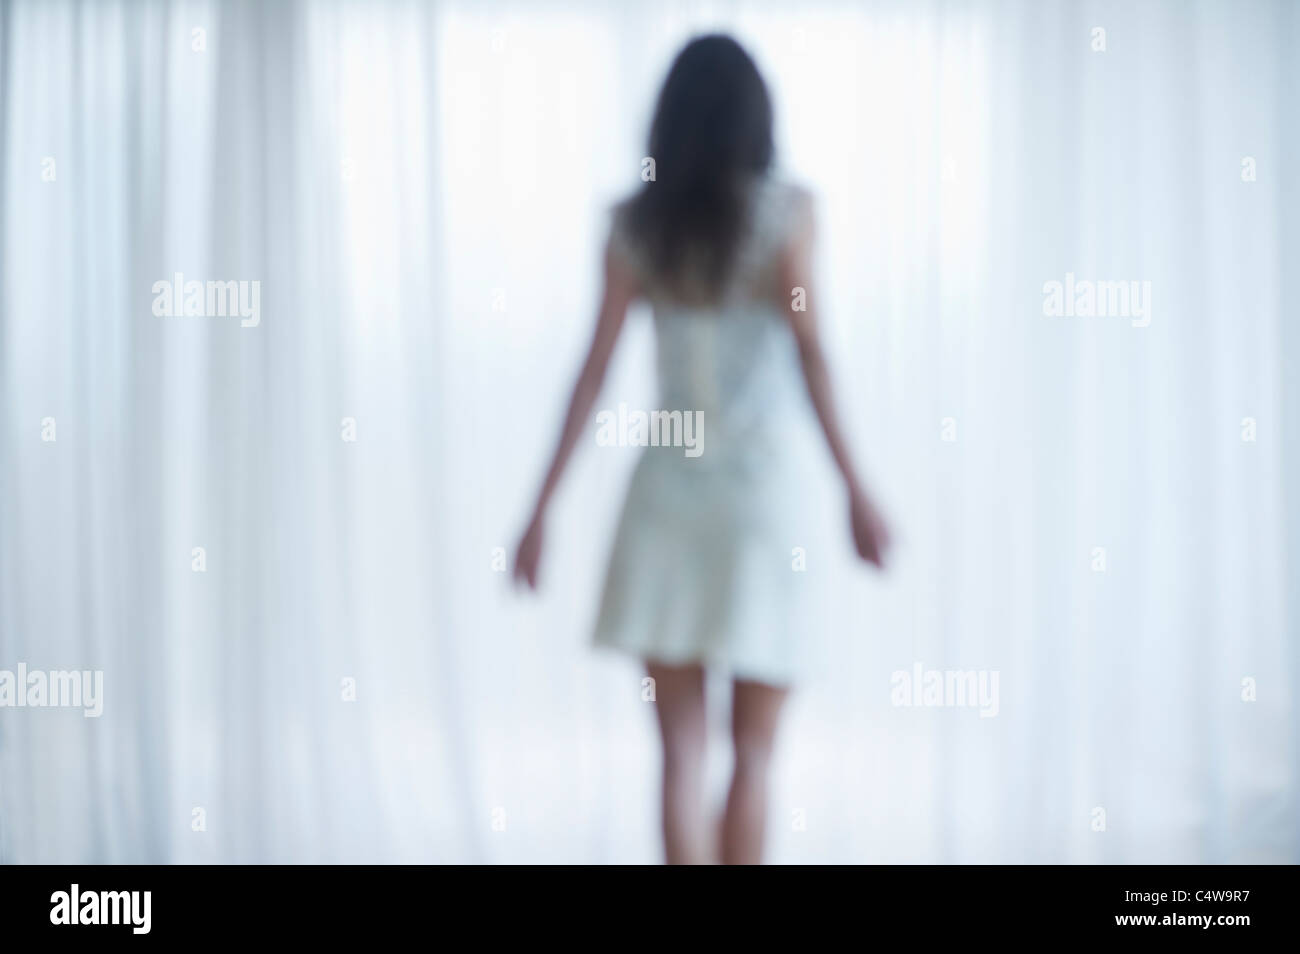 USA, New Jersey, Jersey City, Young woman standing and looking through window Stock Photo